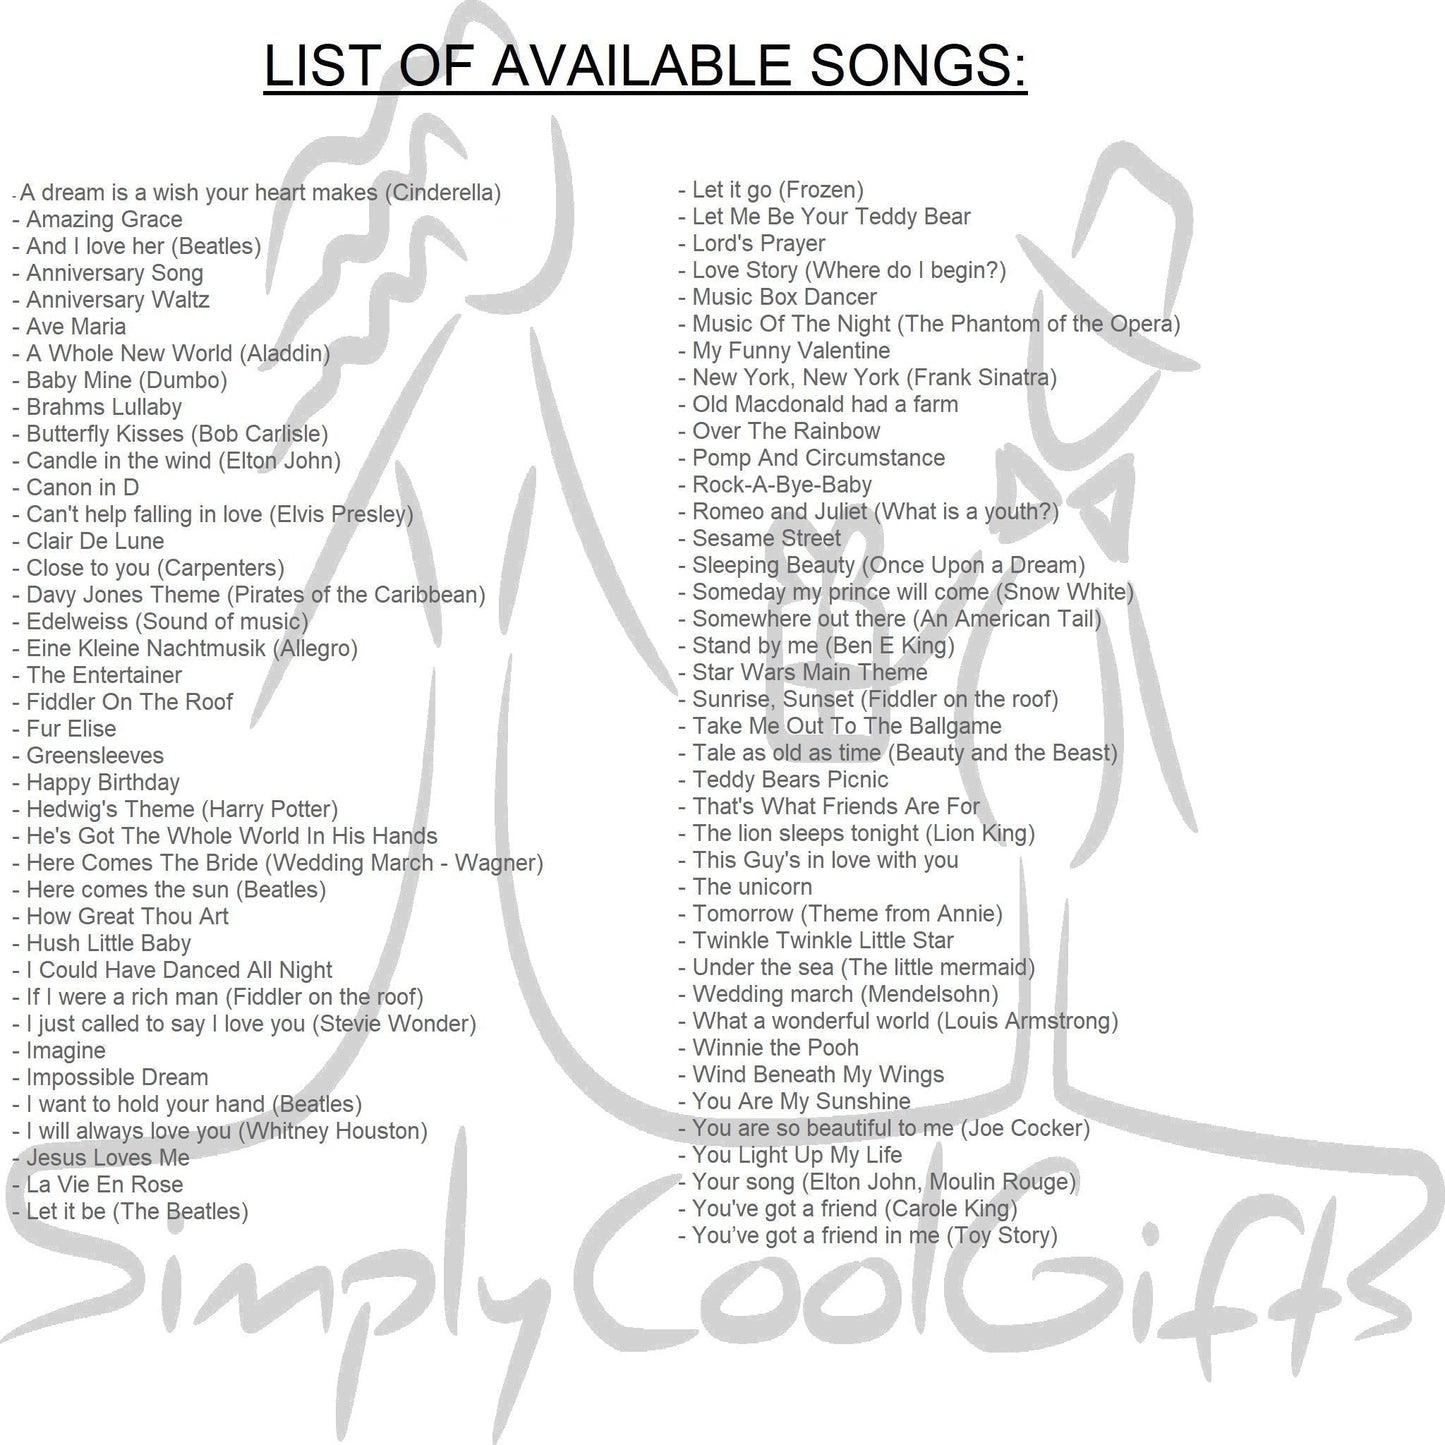 list of song for music box to choose from, CLose to you, Happy Birthday, Here comes the sun, 